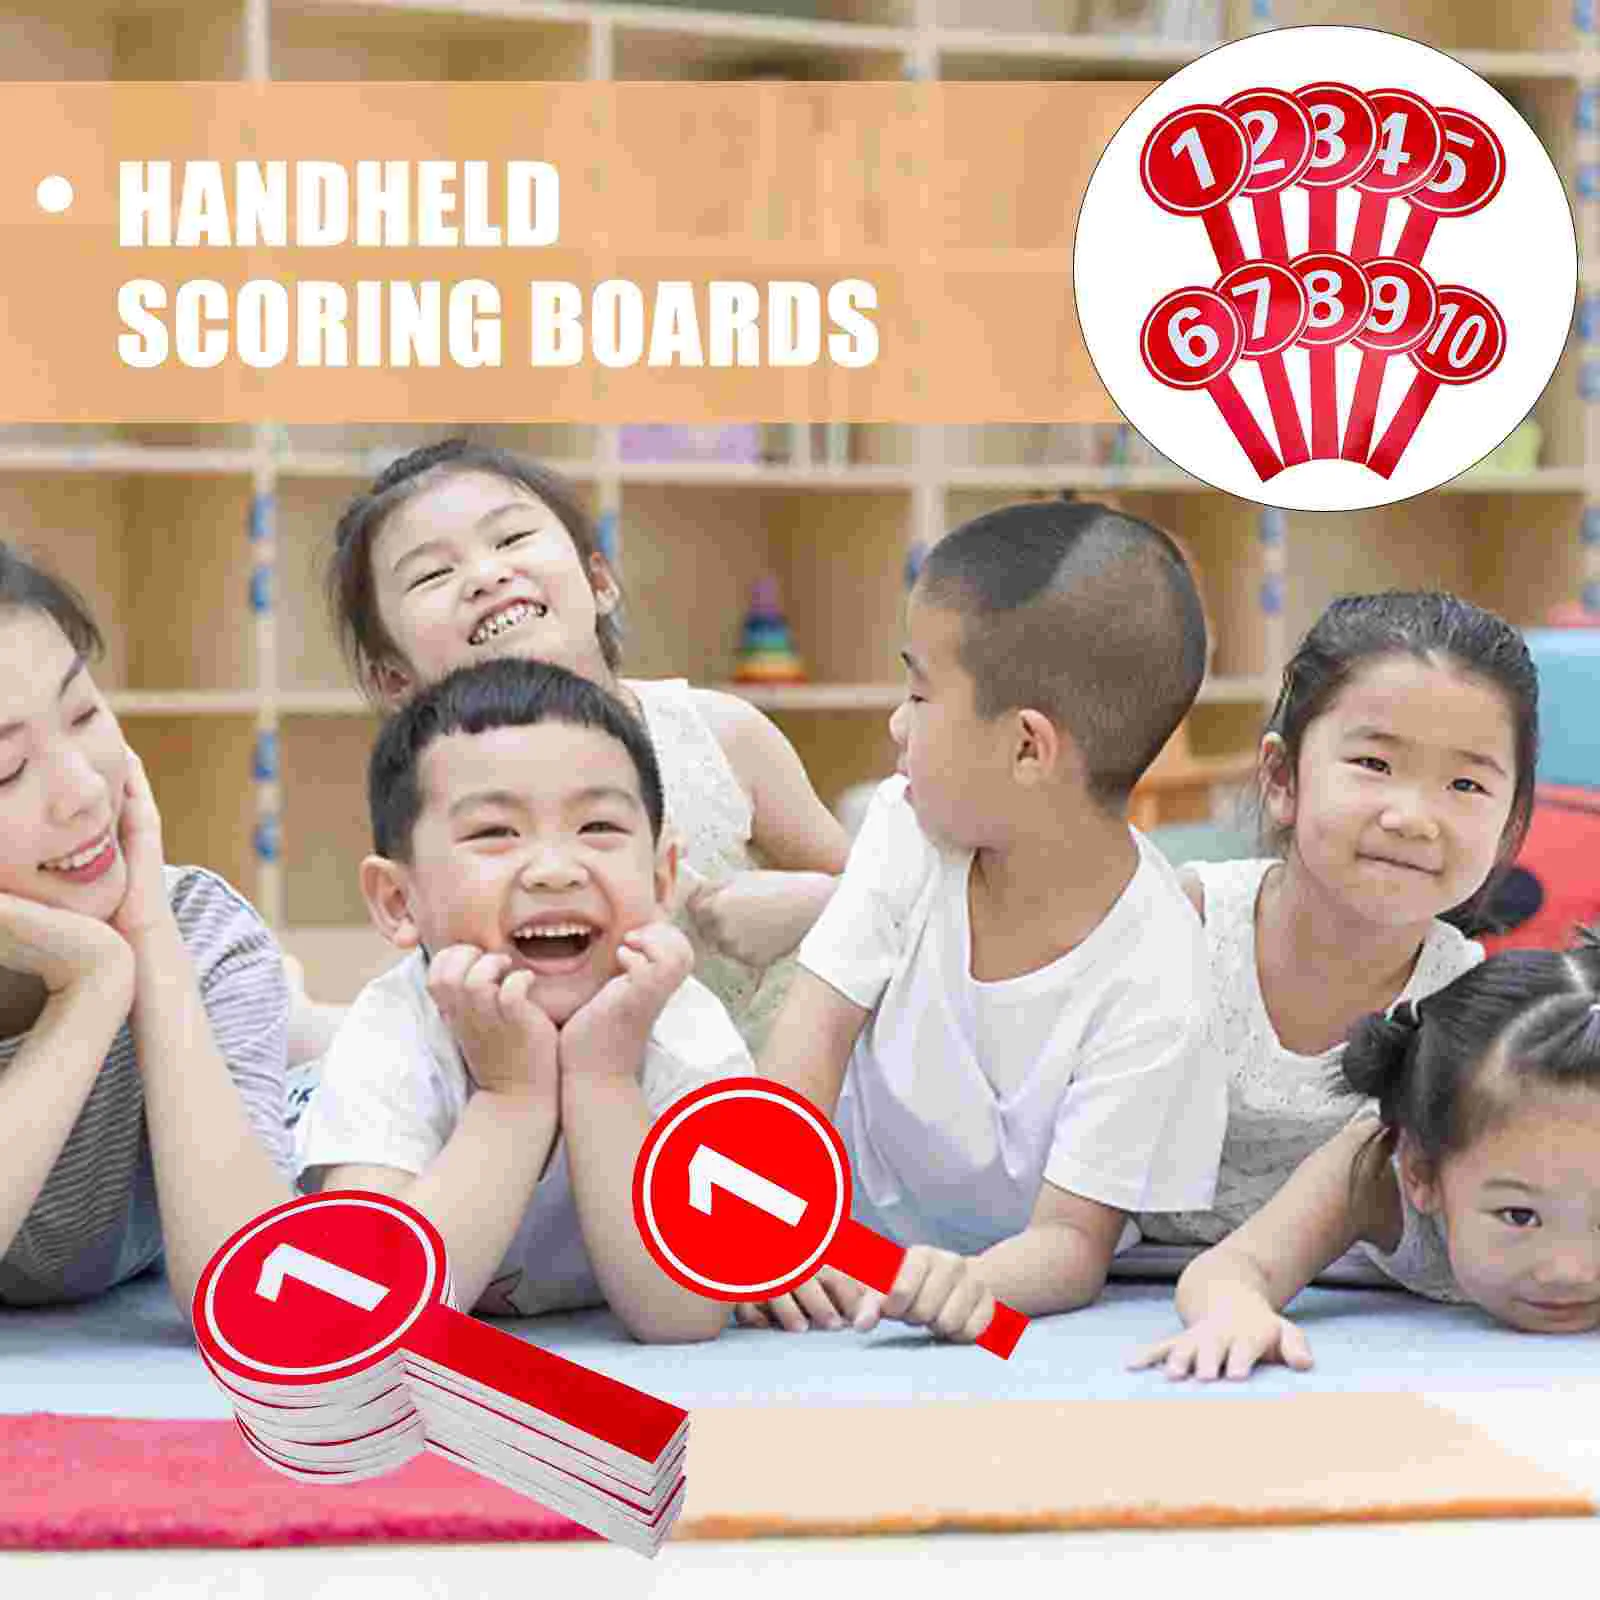 

Holding A Number Plate Reusable Scoreboard Competition Voting Scoreboards Multi-use Portable Whiteboard